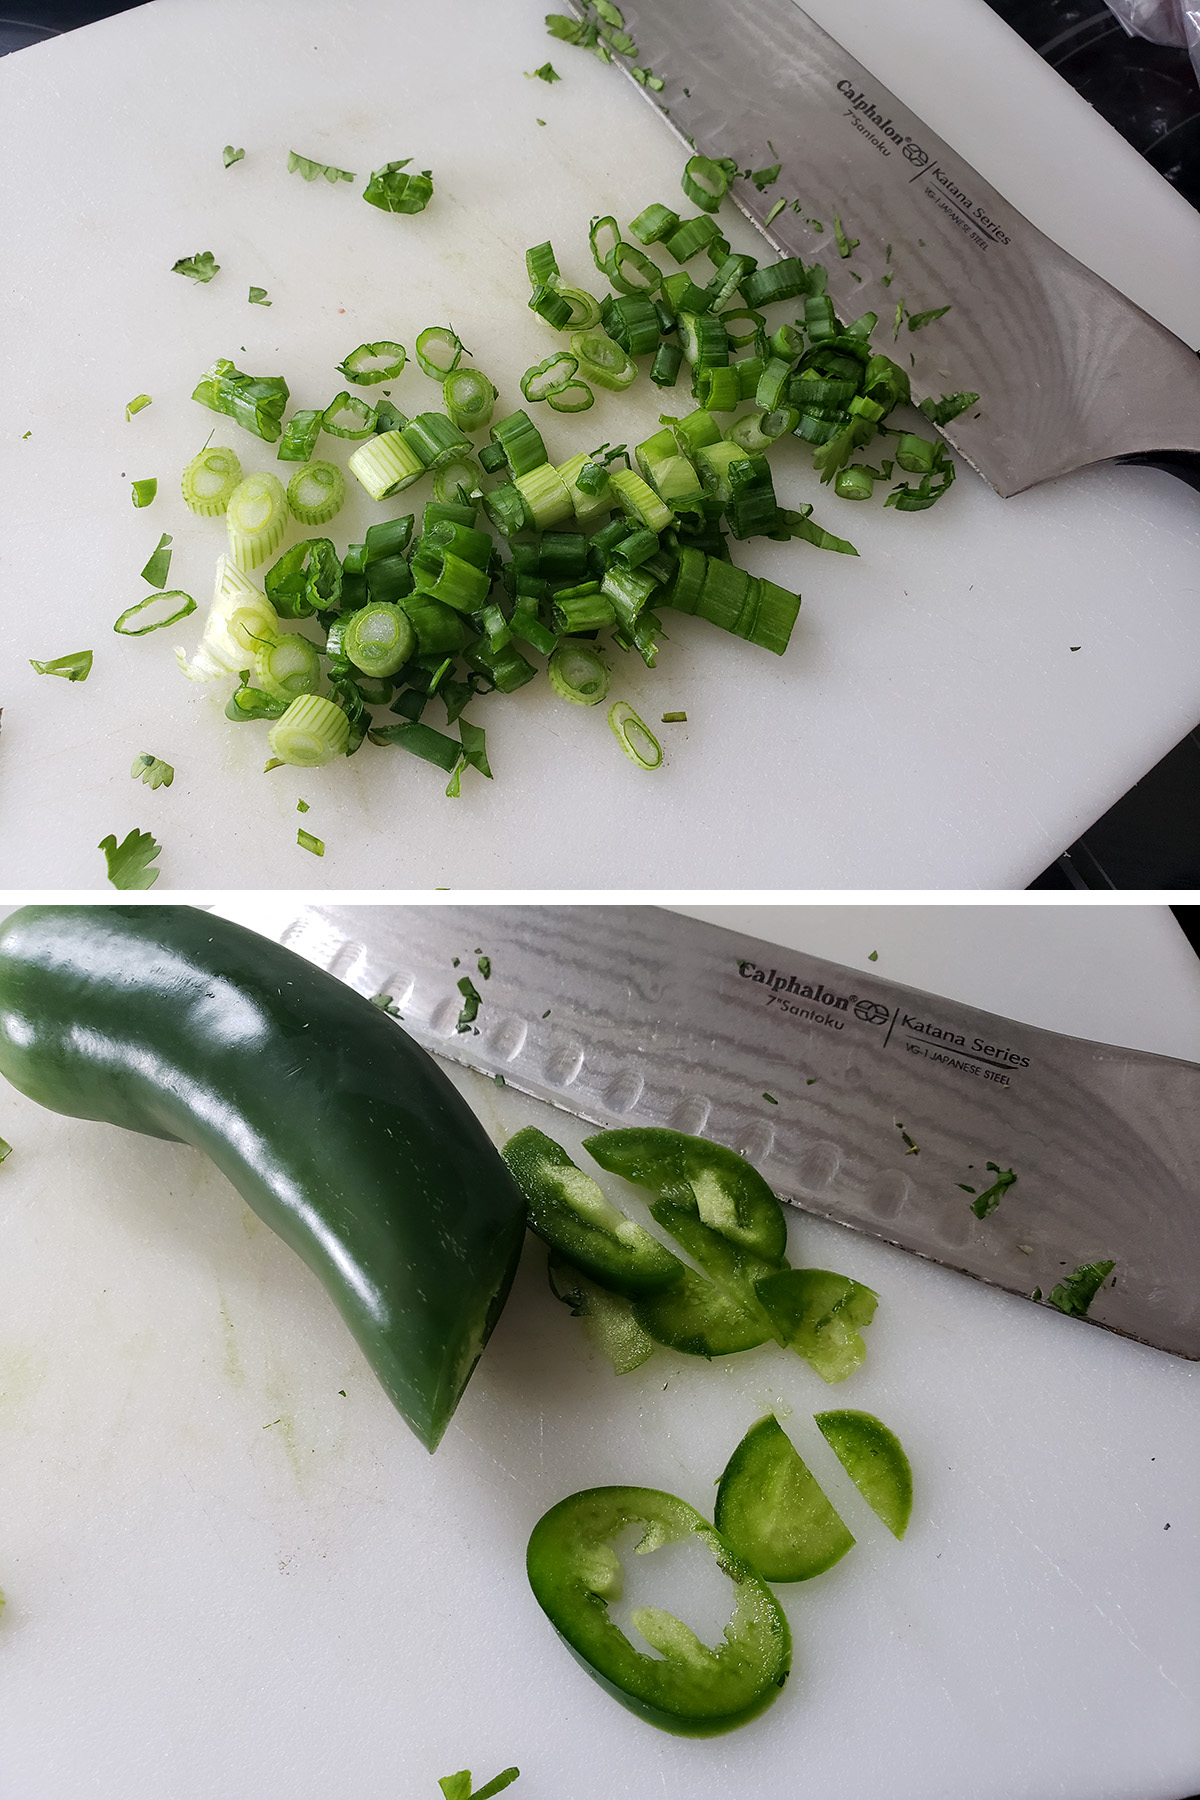 A two part compilation image. The top image shows green onions being slices, the bottom shows a jalapeno being thinly sliced.